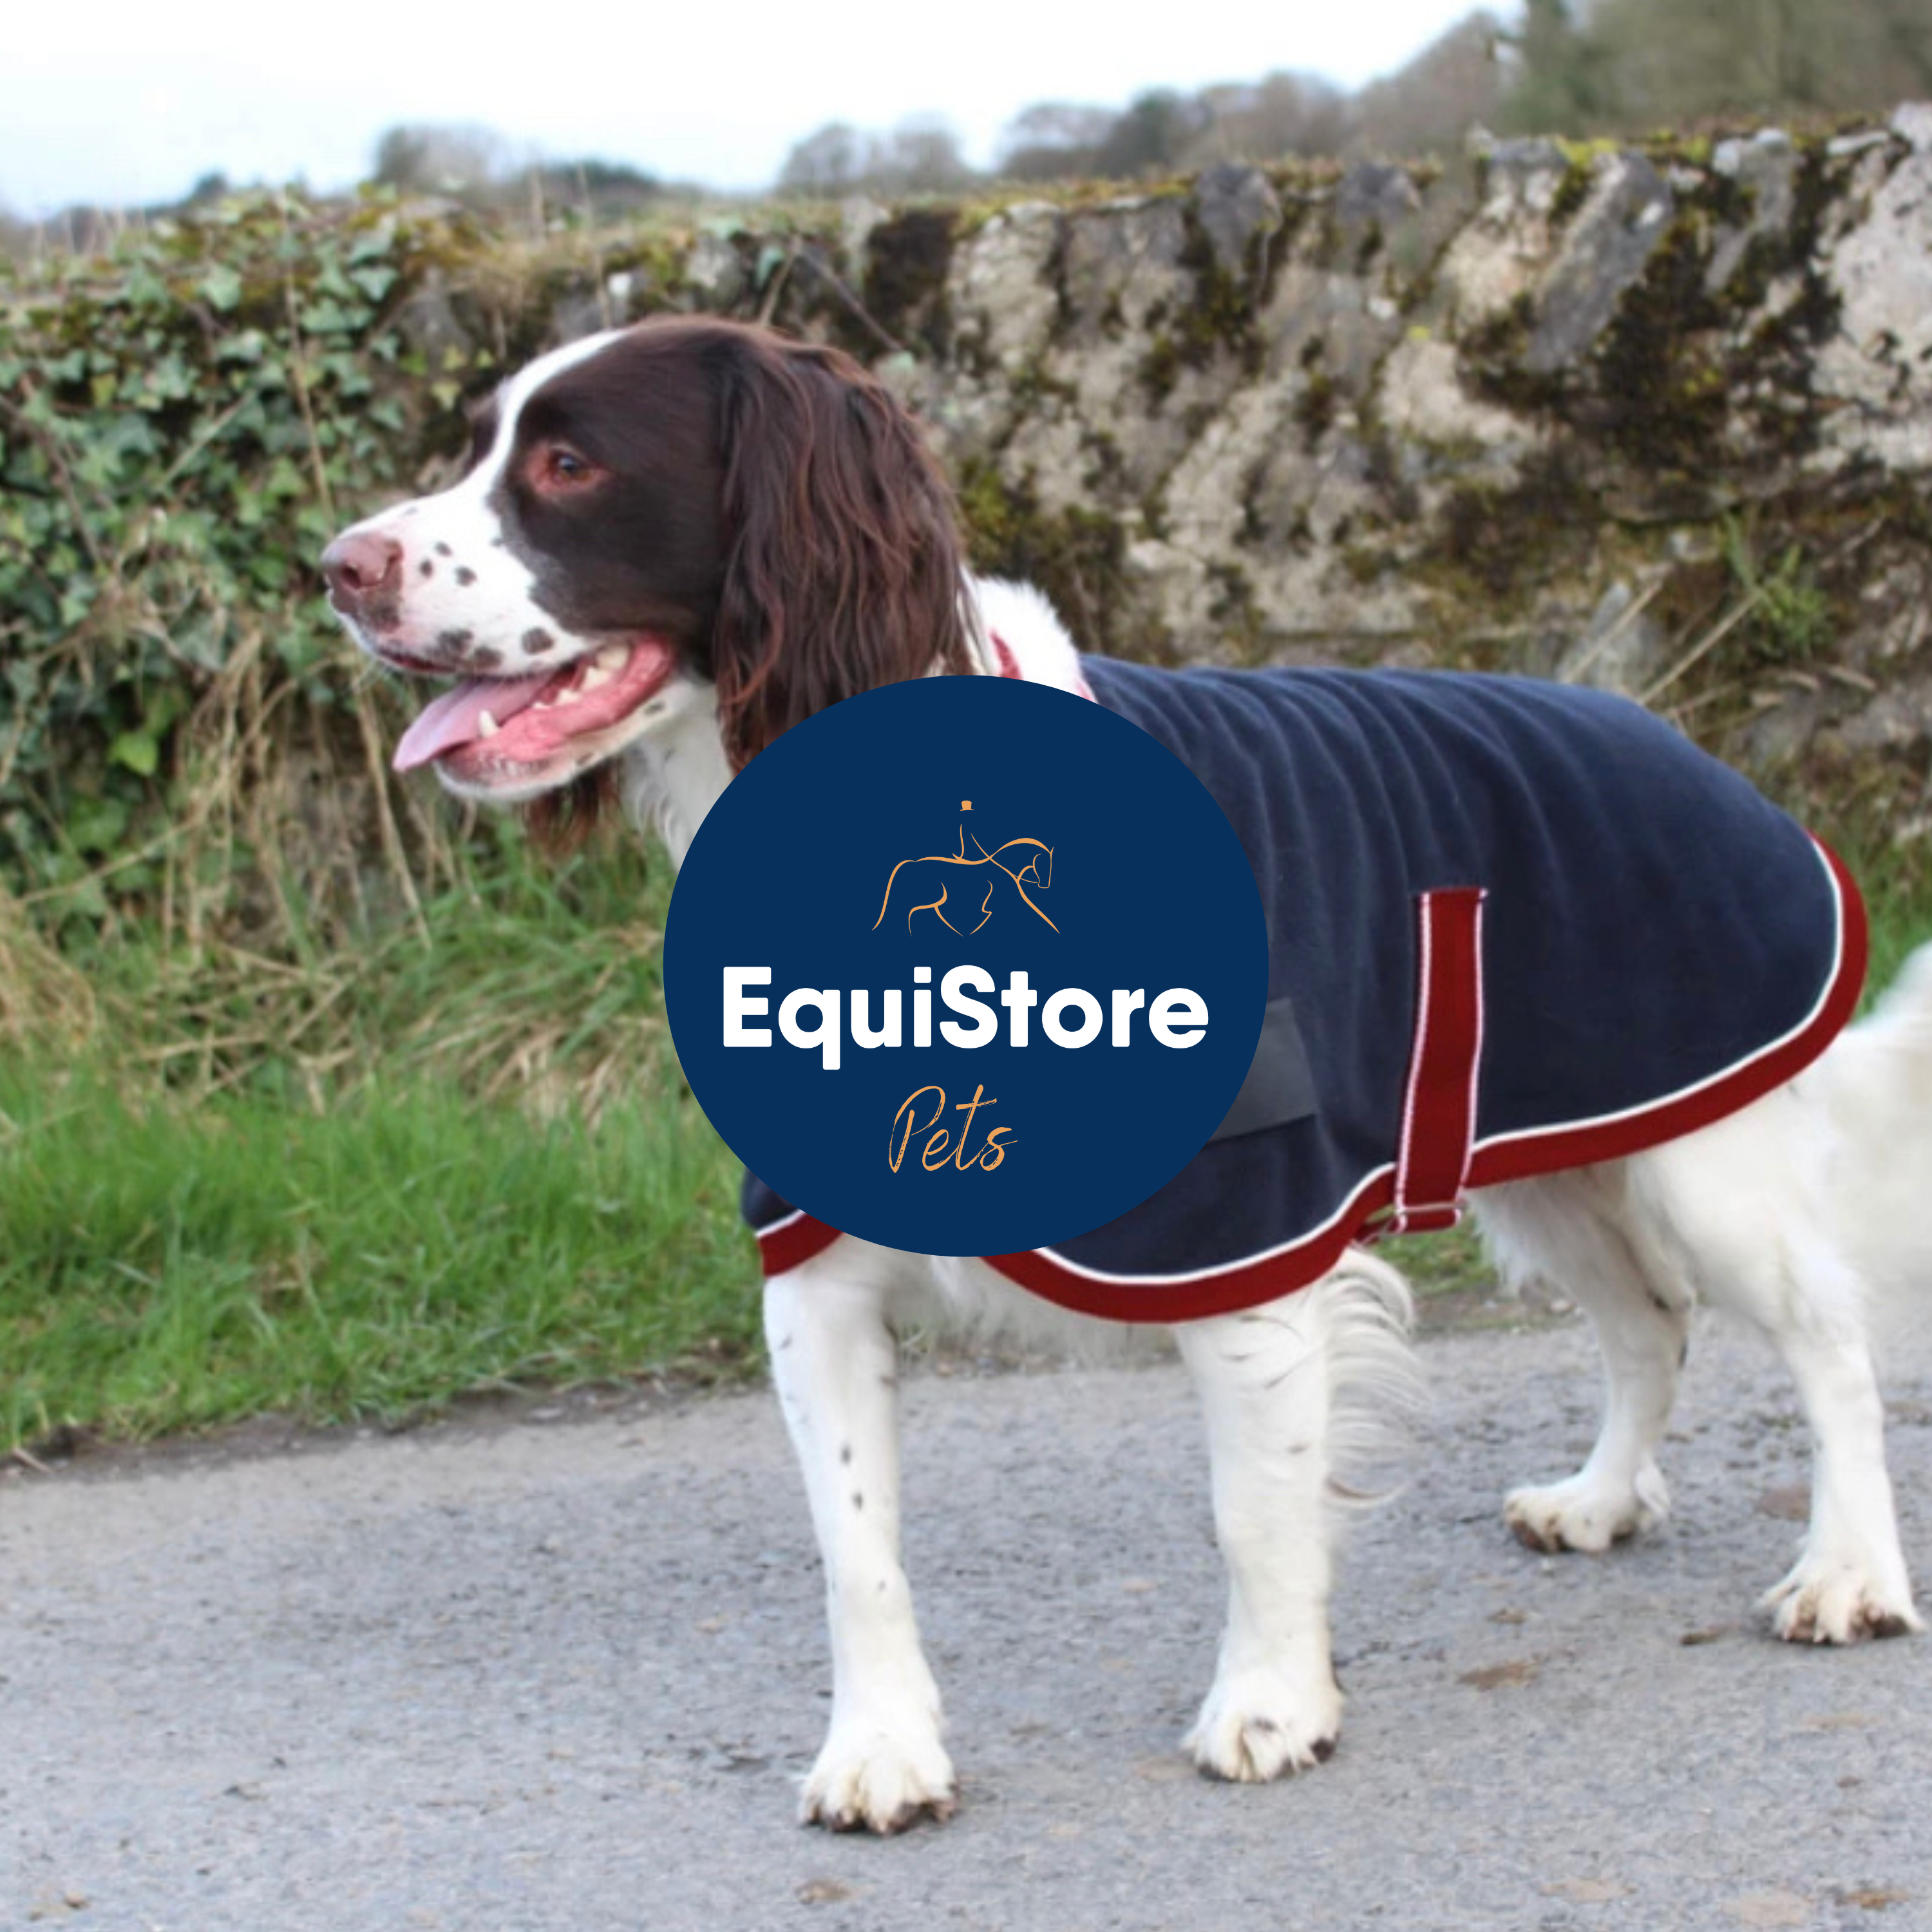 A great selection of dog rugs, dog coats,. dog toys and more, available in Ireland from Equistore. 